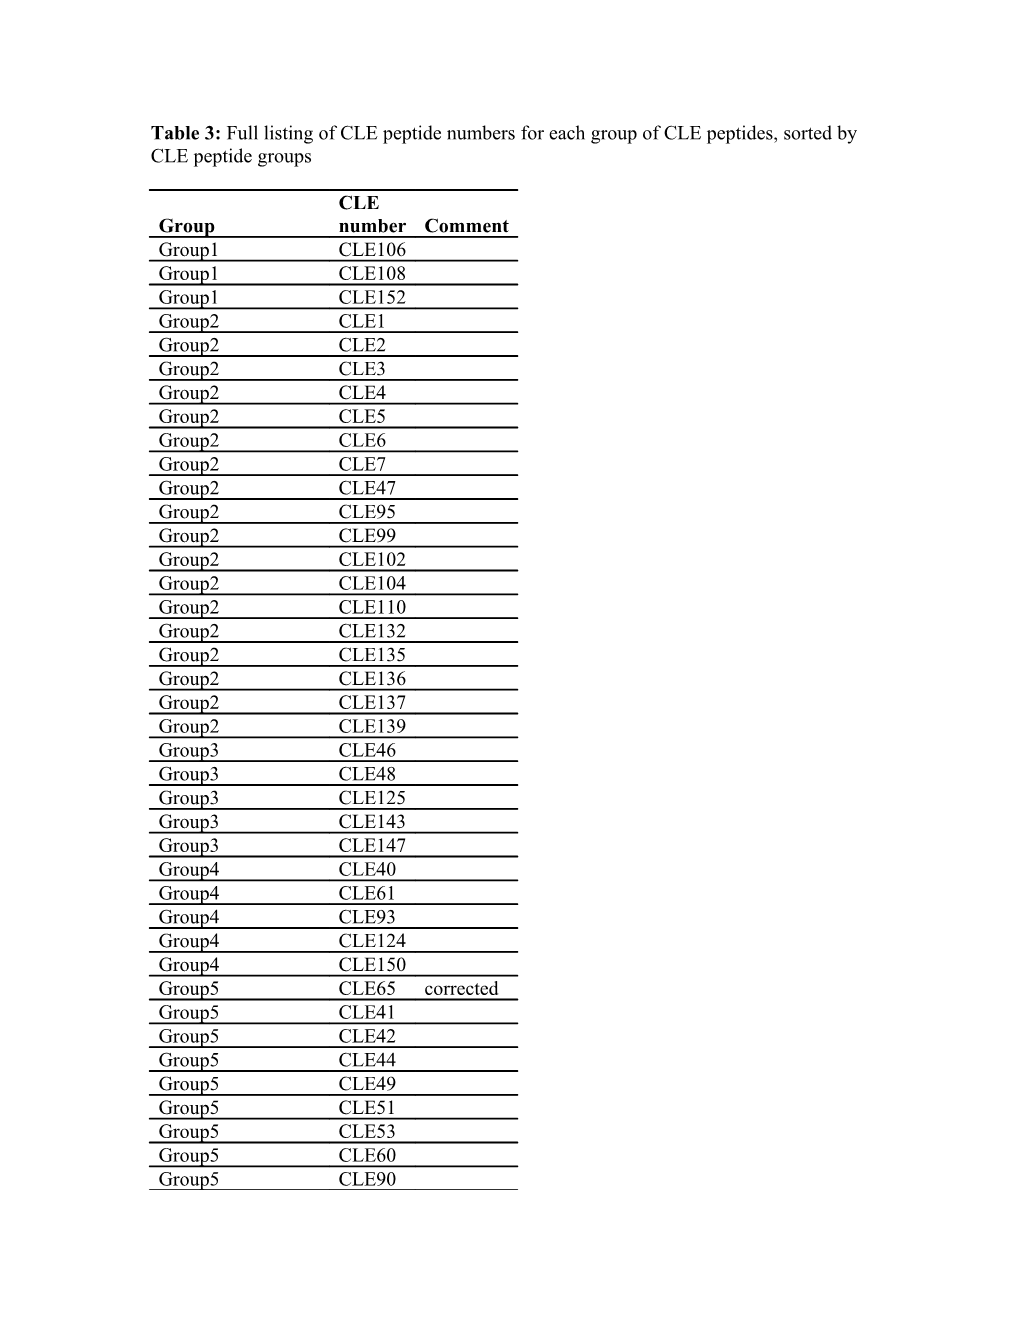 Table 3: Full Listing of CLE Peptide Numbers for Each Group of CLE Peptides, Sorted By